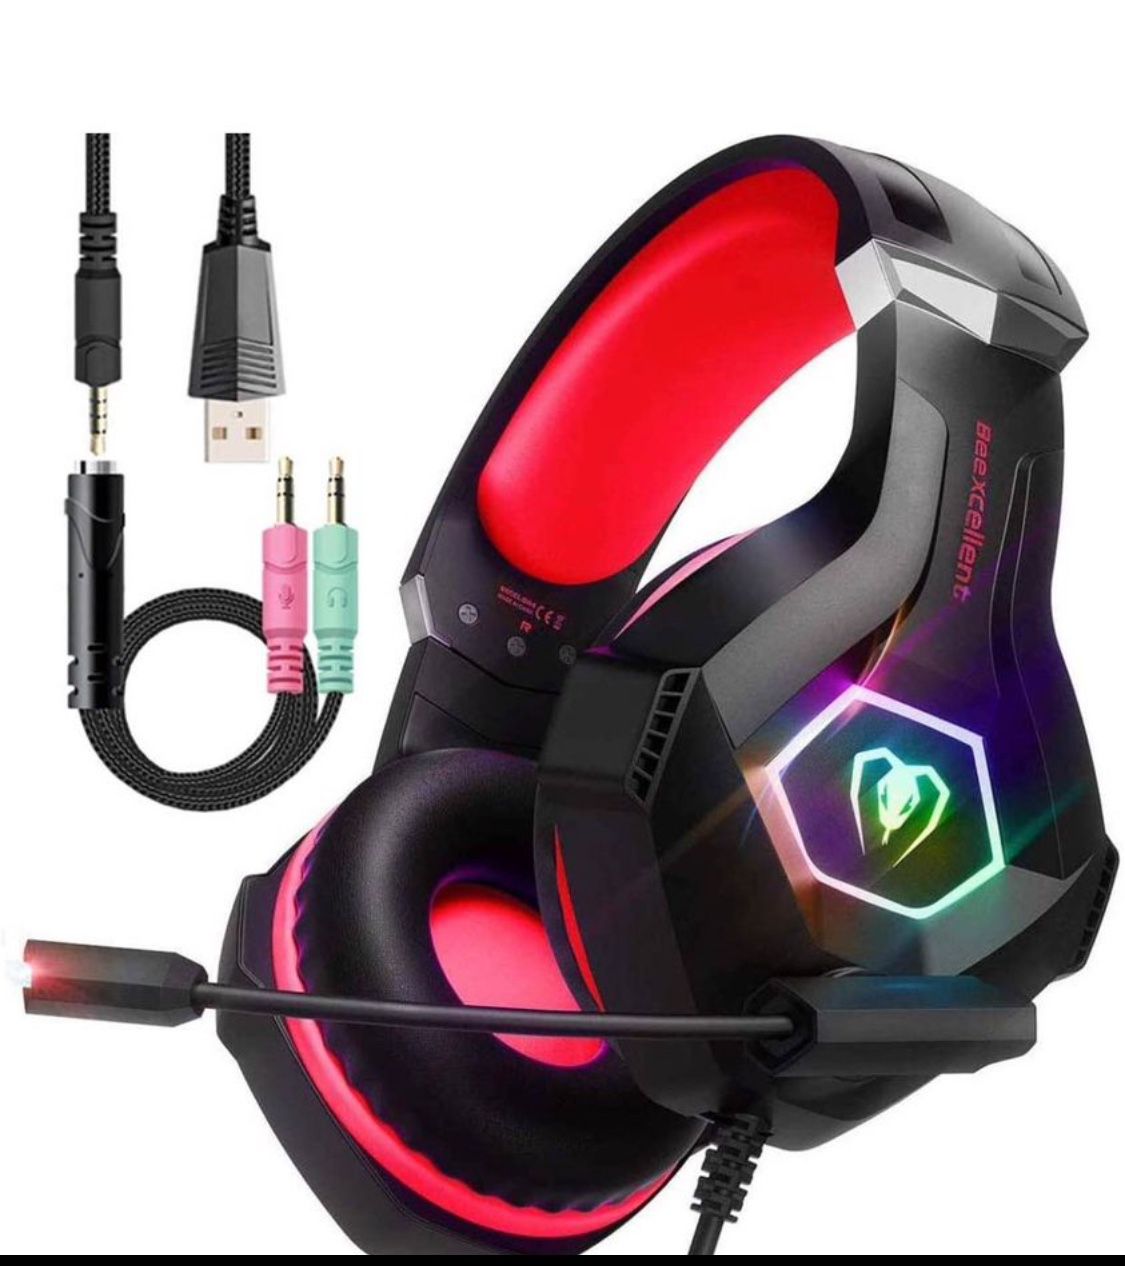 New! Gaming Headset with Mic for Xbox one PC PS4, Noise Cancelling Over Ear Gaming Headphones, Stereo Bass Surround Sound with LED Light